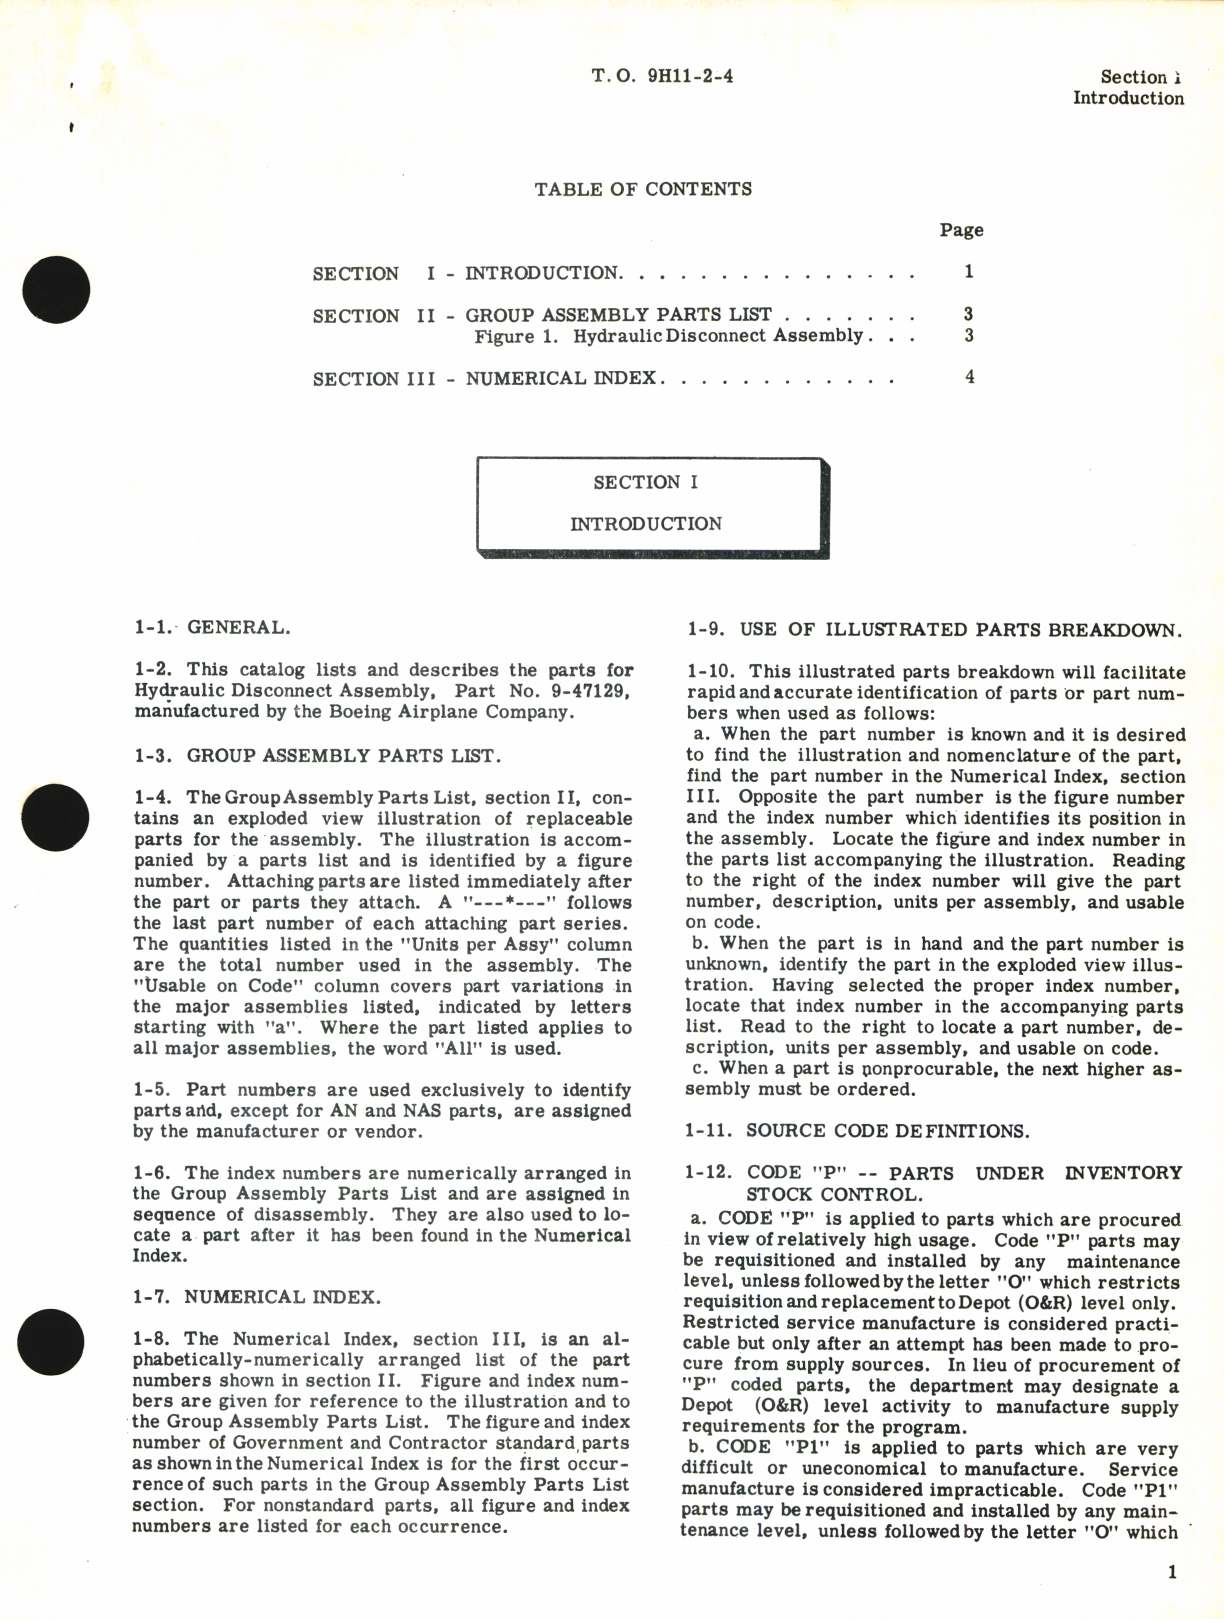 Sample page 3 from AirCorps Library document: Illustrated Parts Breakdown for Hydraulic Disconnect Assembly Part No. 9-47129